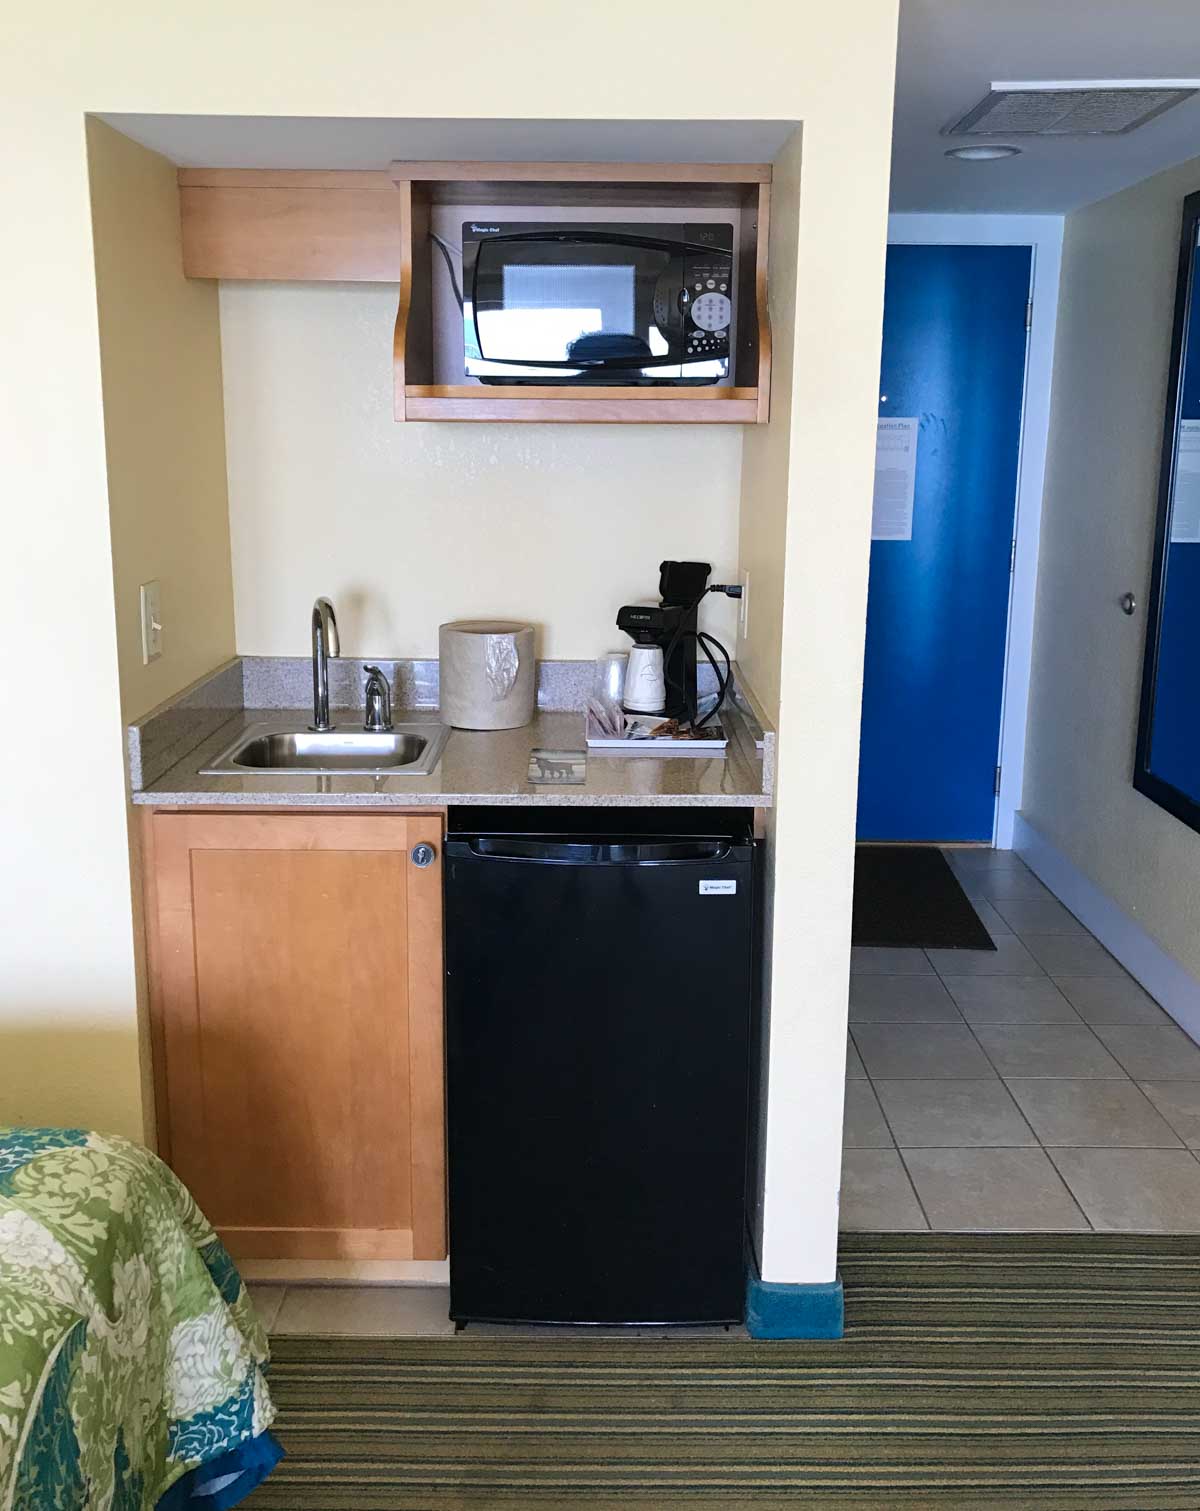 The kitchenette in a family-friendly hotel room.